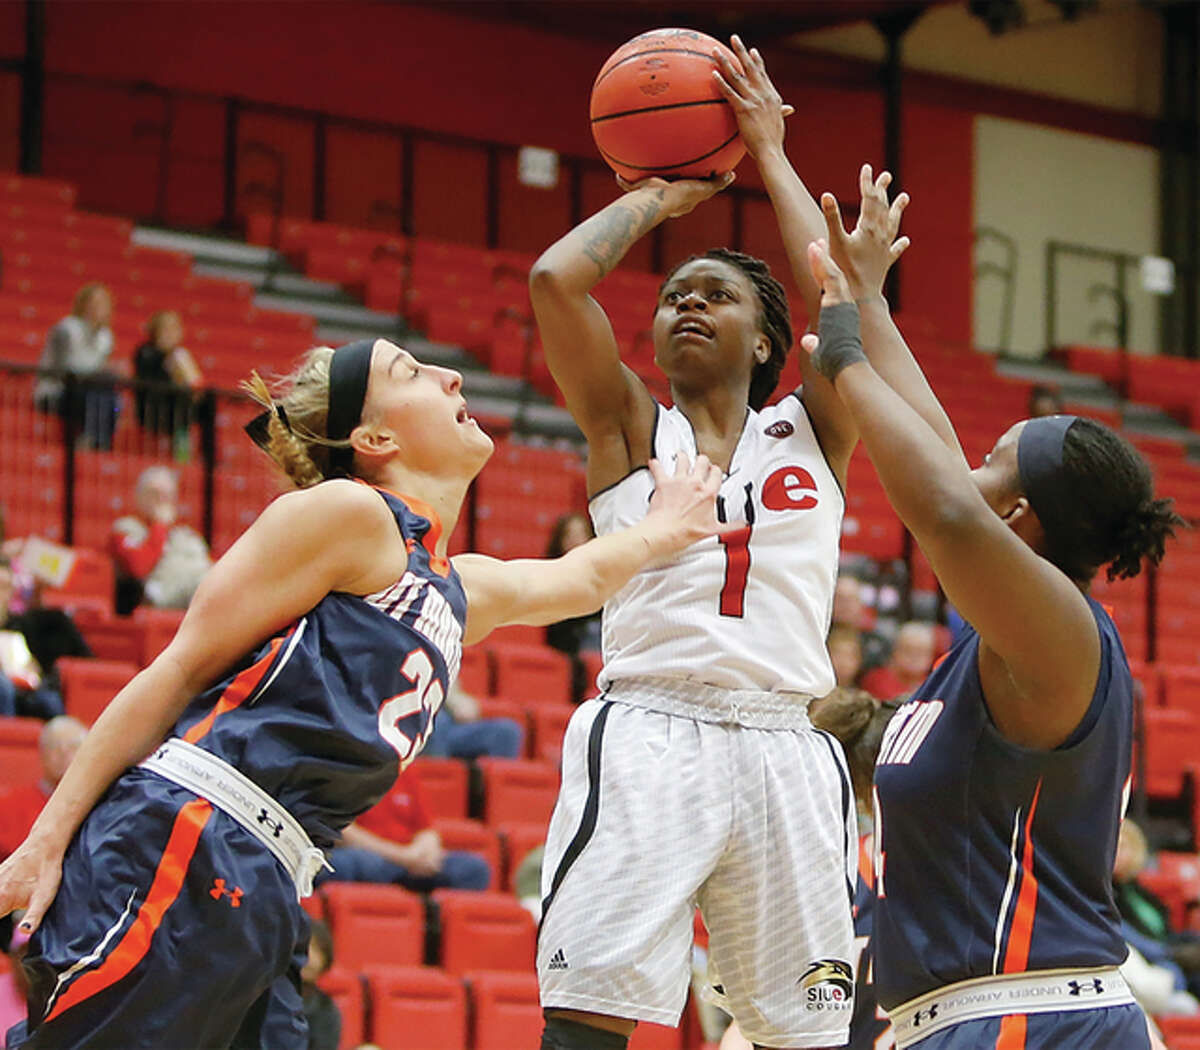 SIUE’s CoCo Moore (middle) puts up a shot contested by UT Martin’s Haley Howard (left) and Shy Copney during OVC women’s basketball action Saturday afternoon at Vadalabene Center in Edwardsville.